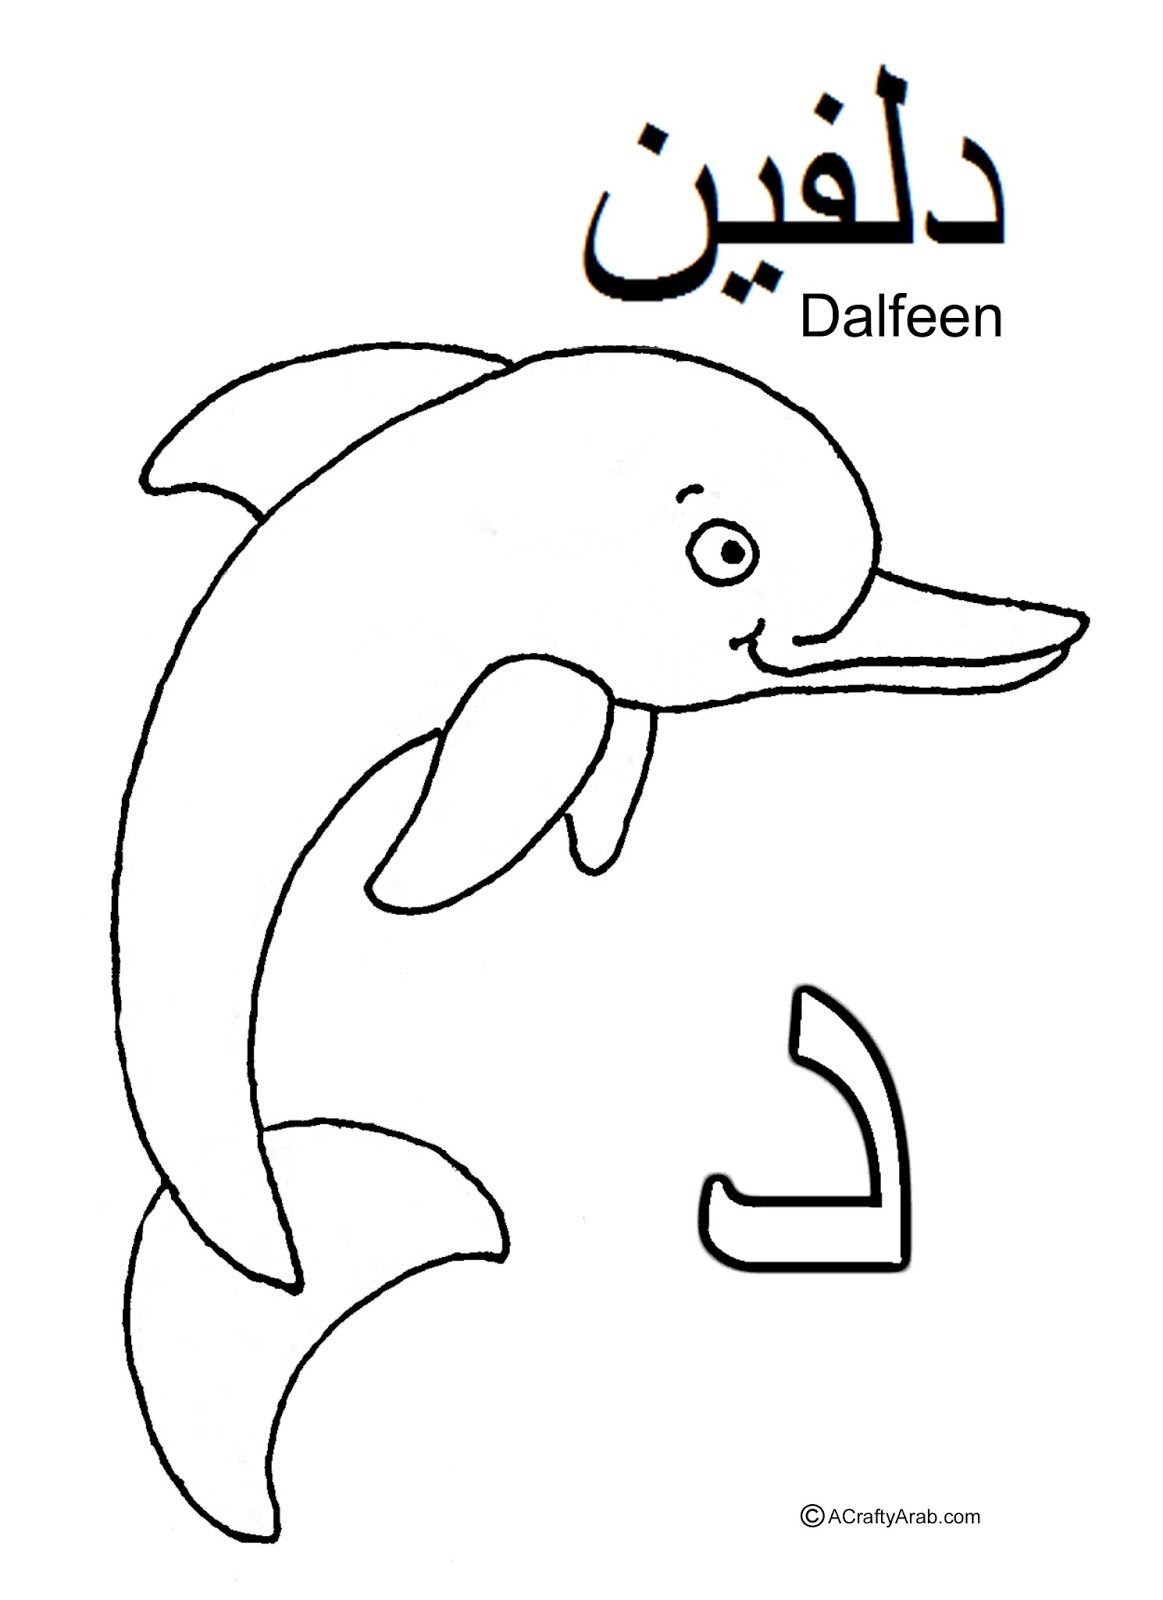 A Crafty Arab: Arabic Alphabet coloring pages...'Dal is for Dalfeen